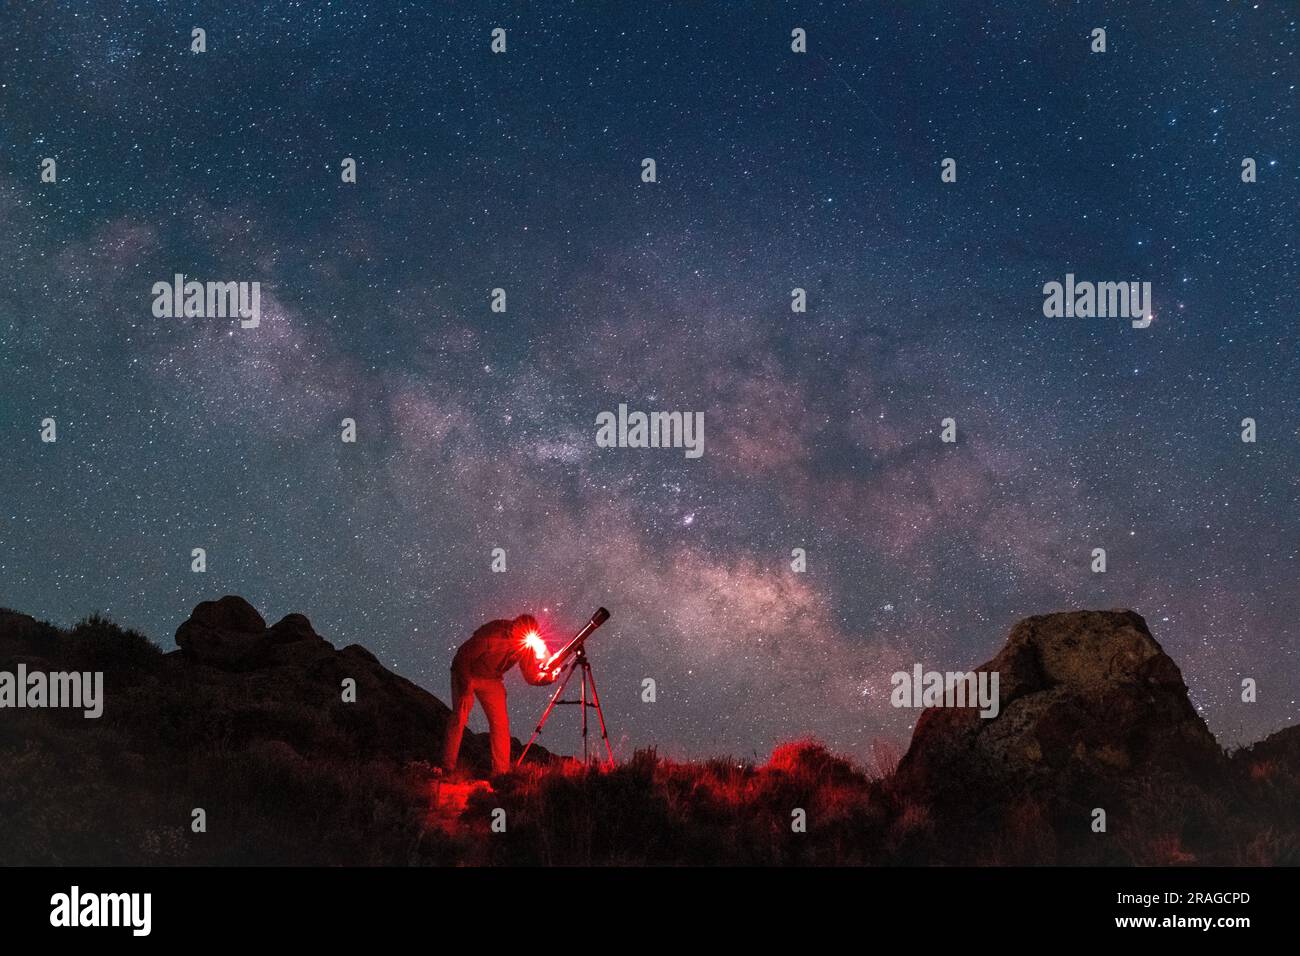 THE MILKY WAY CORE RISES ABOVE AN AMATEUR ASTRONOMER IN A DARK SKY AREA WEST OF GUNNISON, COLORADO. Stock Photo